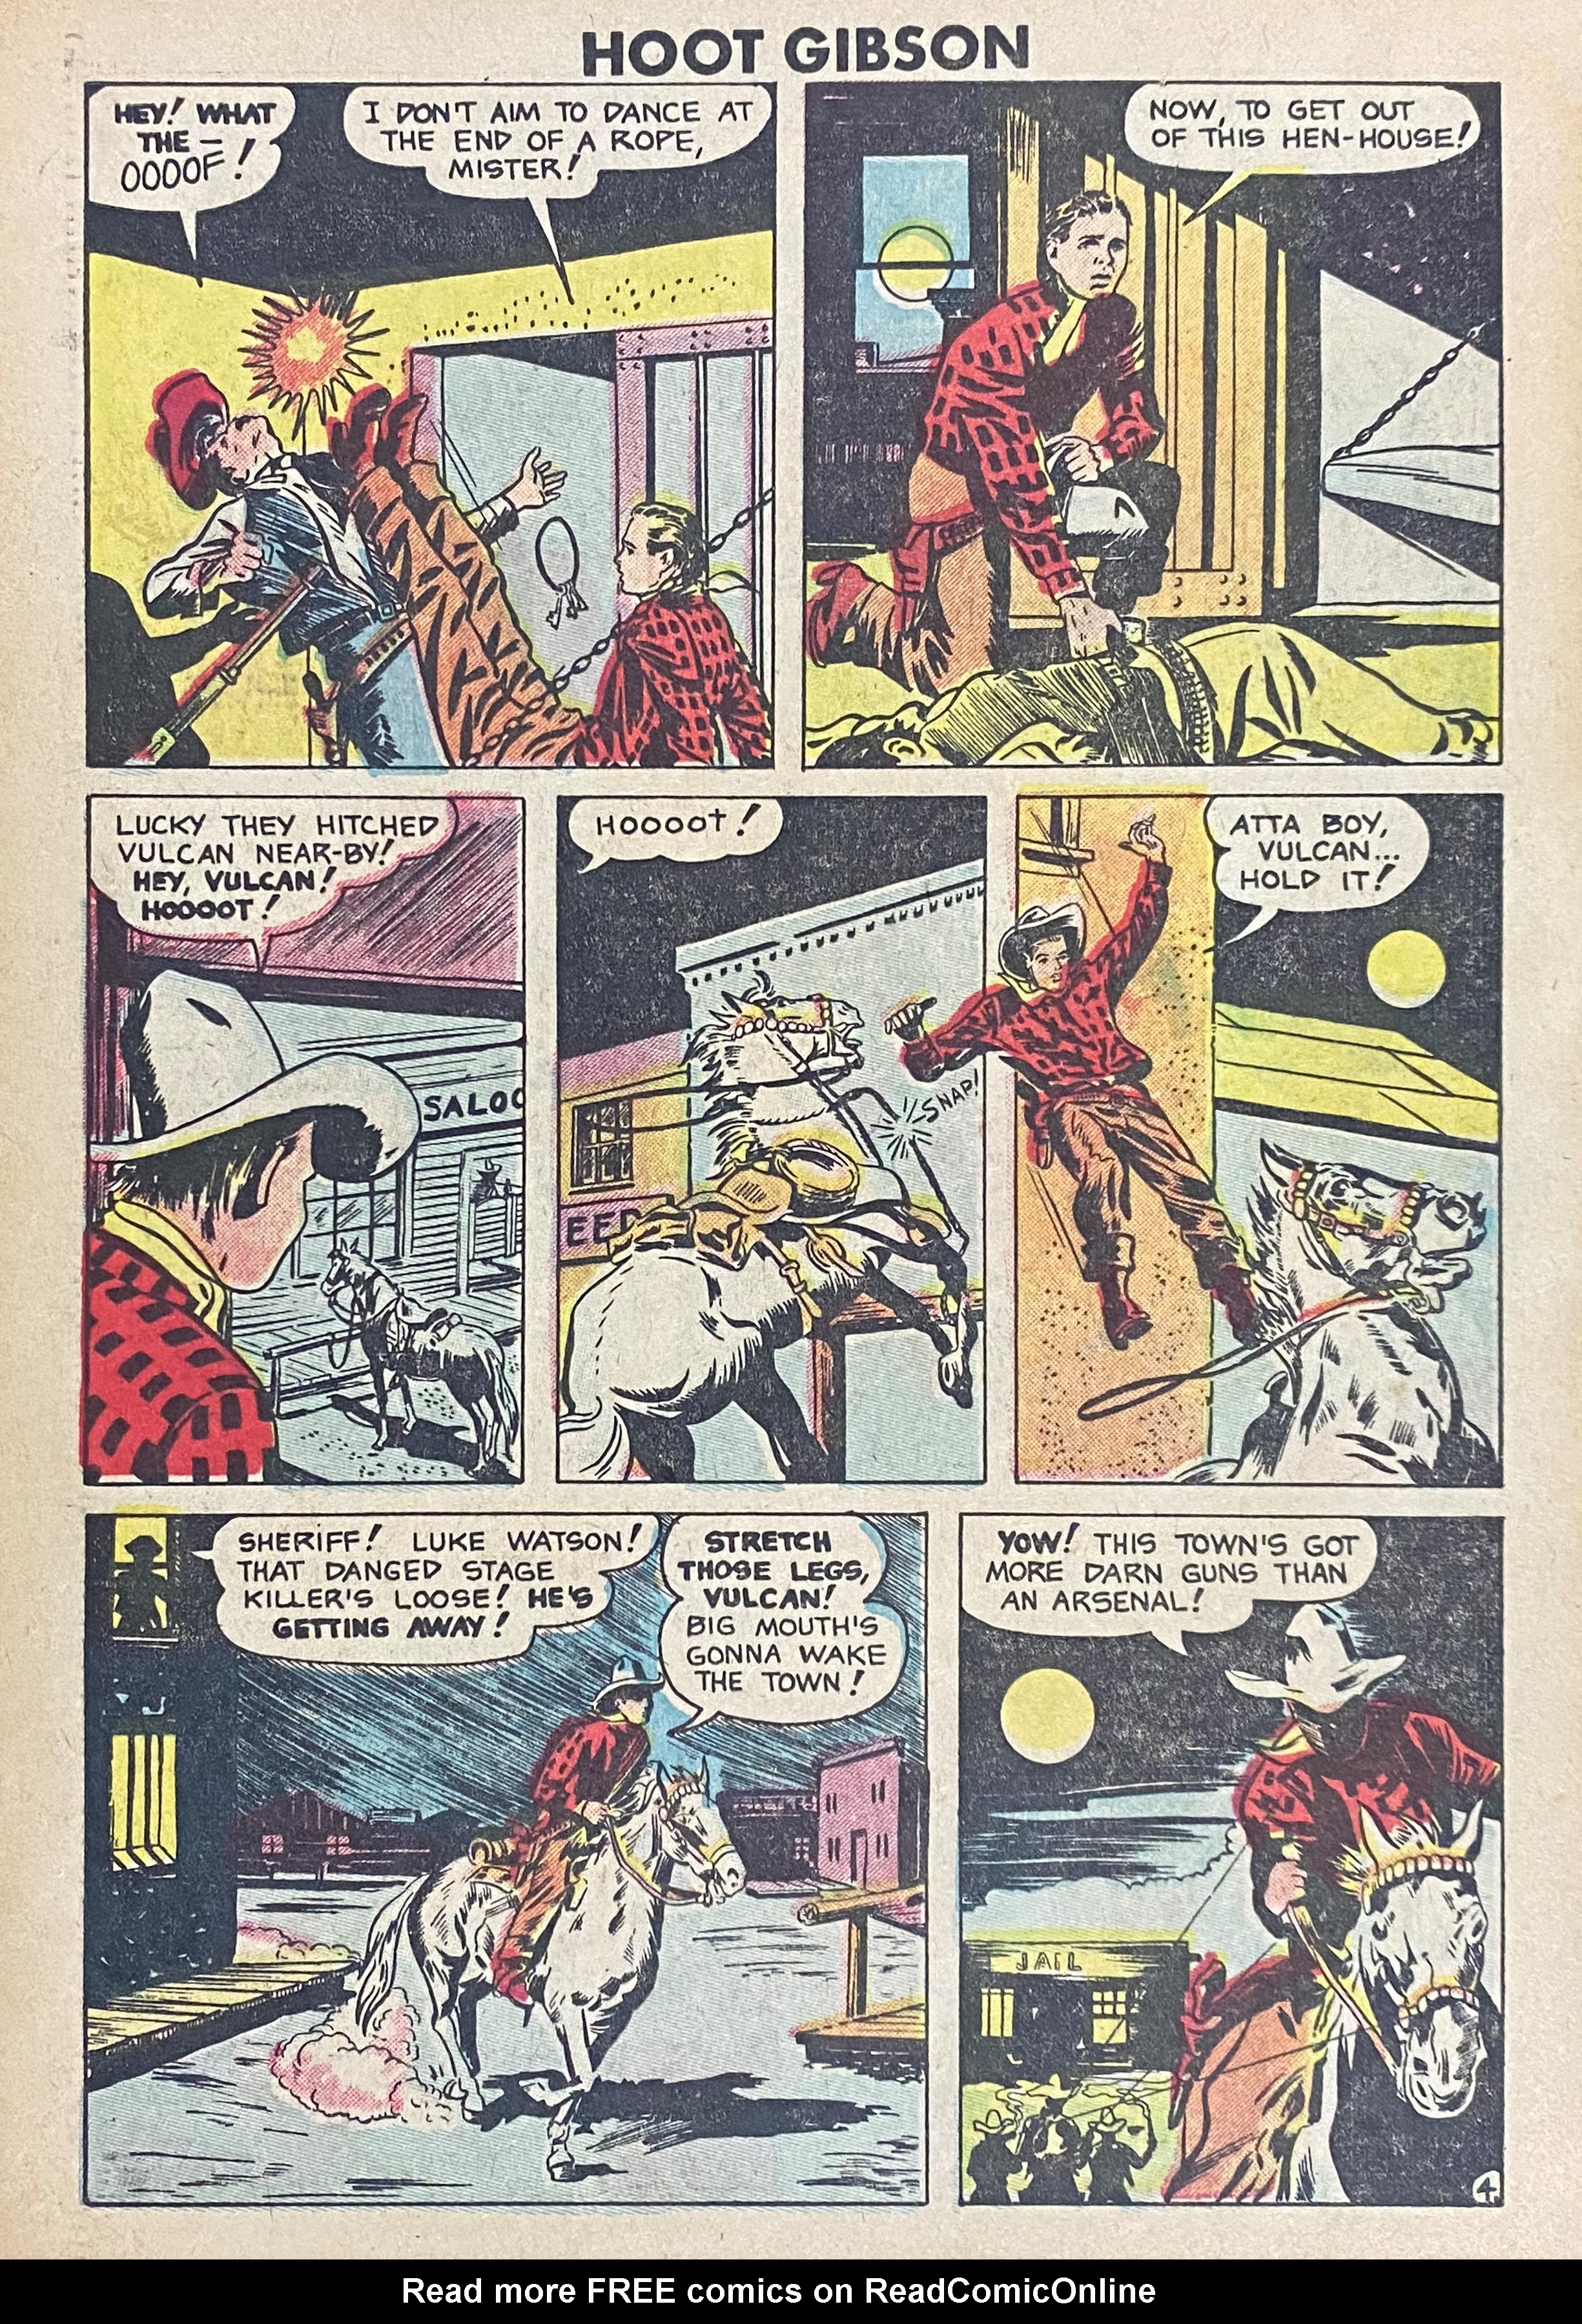 Read online Hoot Gibson comic -  Issue #3 - 5